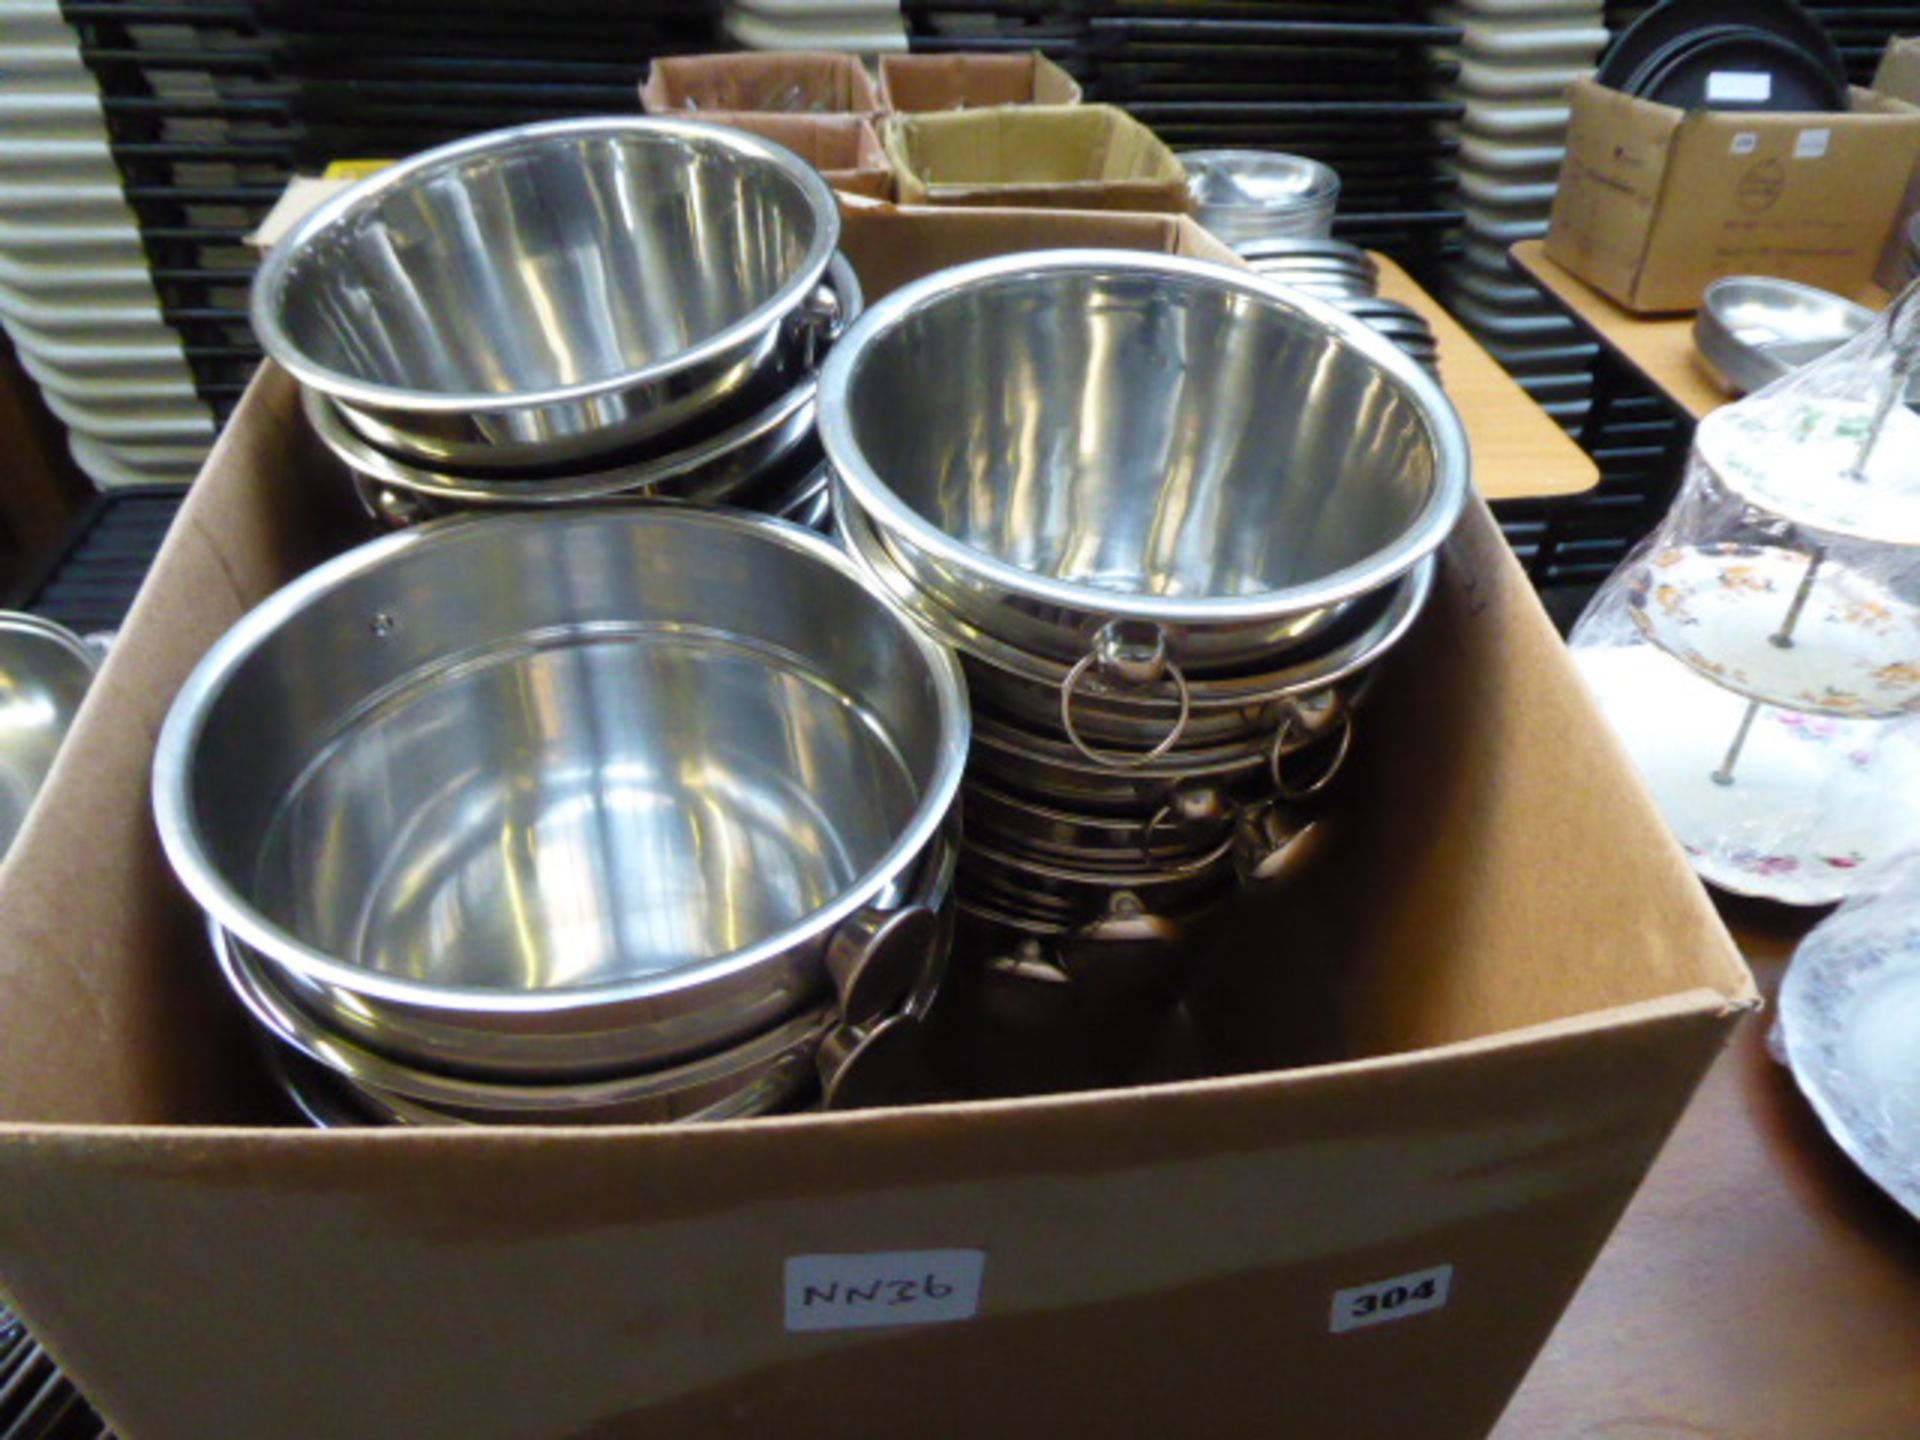 Box containing stainless steel champagne and wine cooler buckets